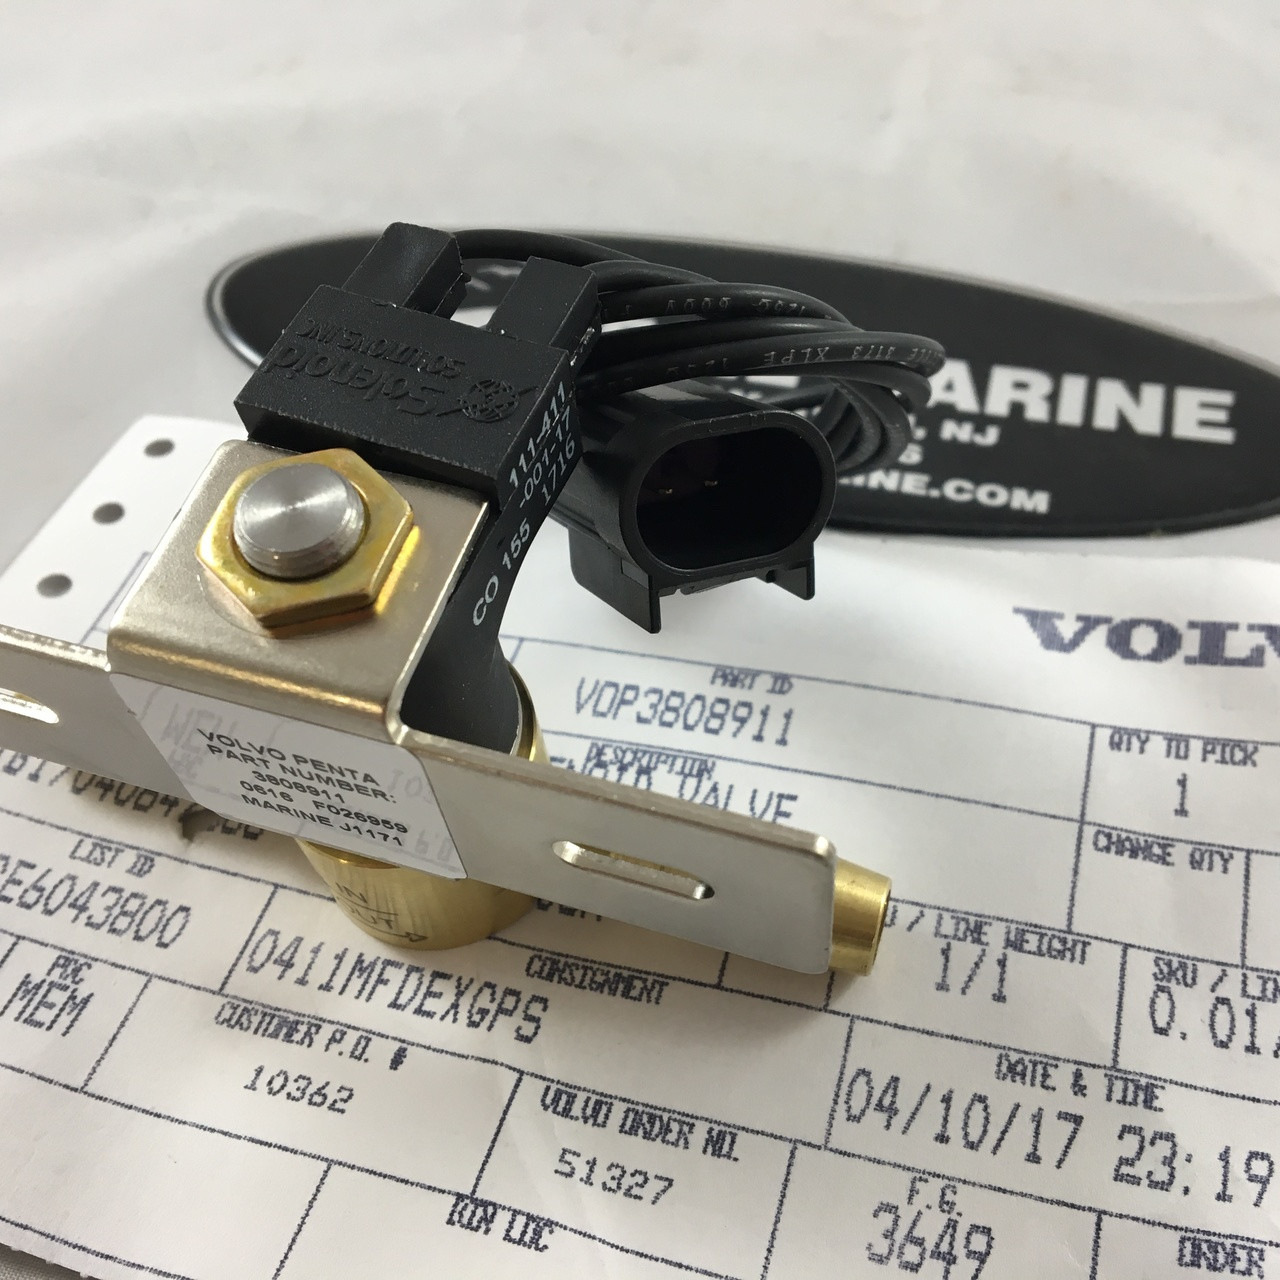 $95.99* GENUINE VOLVO no tax* SOLENOID VALVE 3808911 *In Stock & Ready To Ship!